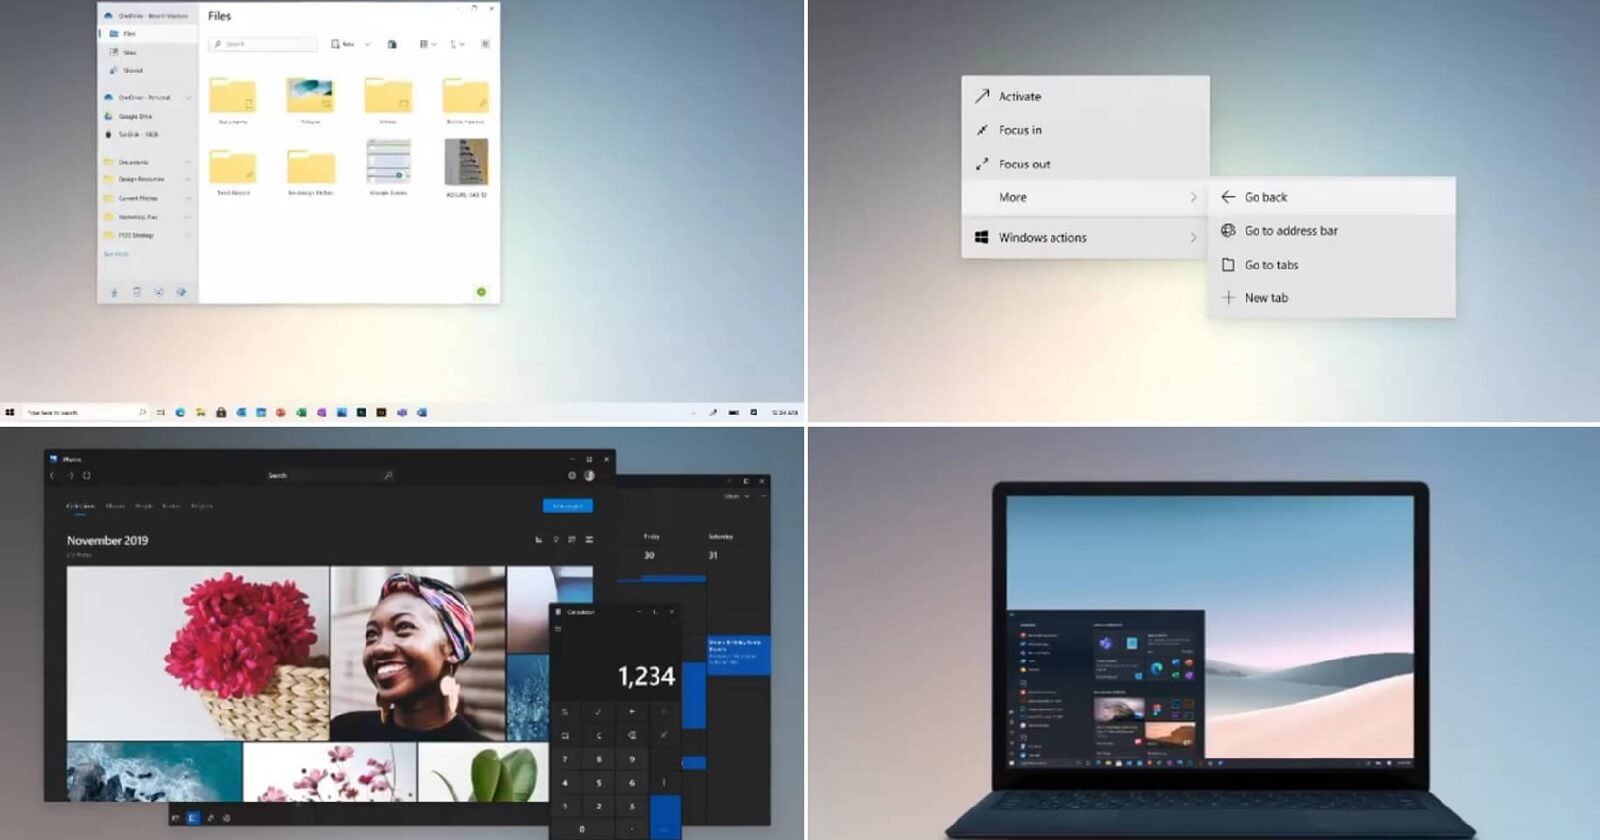 Microsoft CEO hints at a renewed focus and innovations in Windows Windows-10-design-teaser.jpg